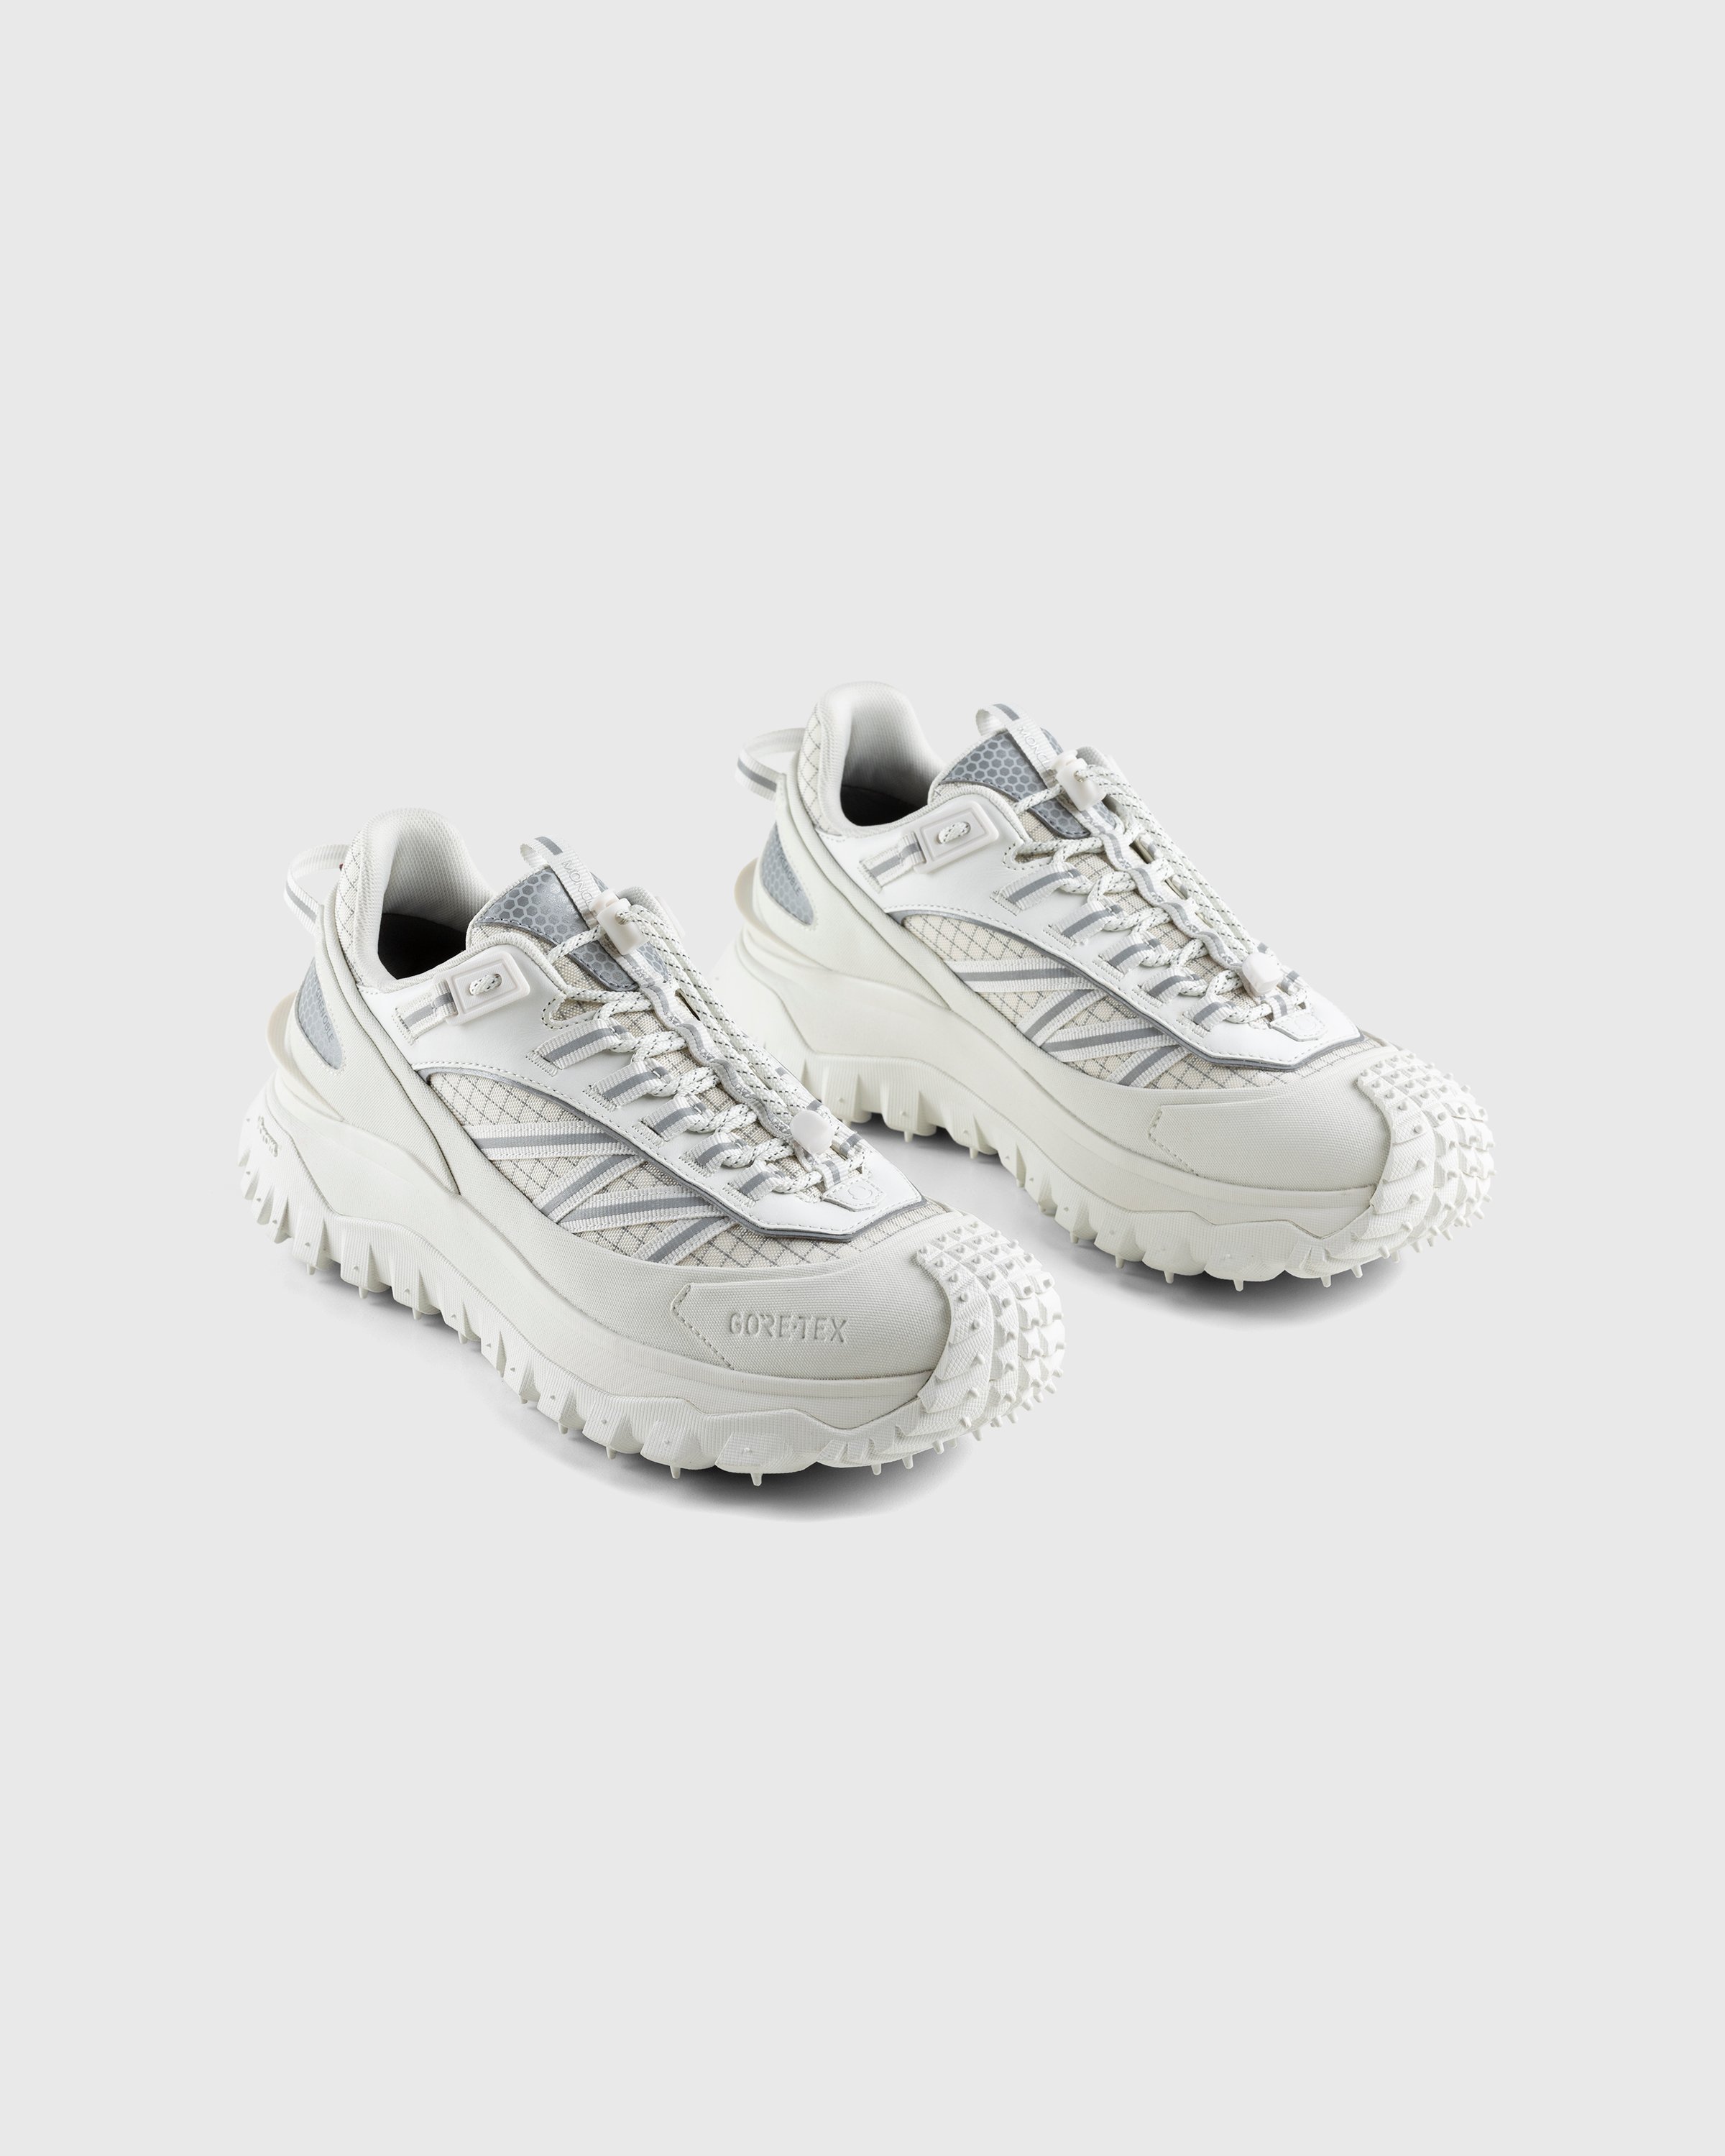 Moncler - Trailgrip GTX Sneakers Off White - Footwear - White - Image 3